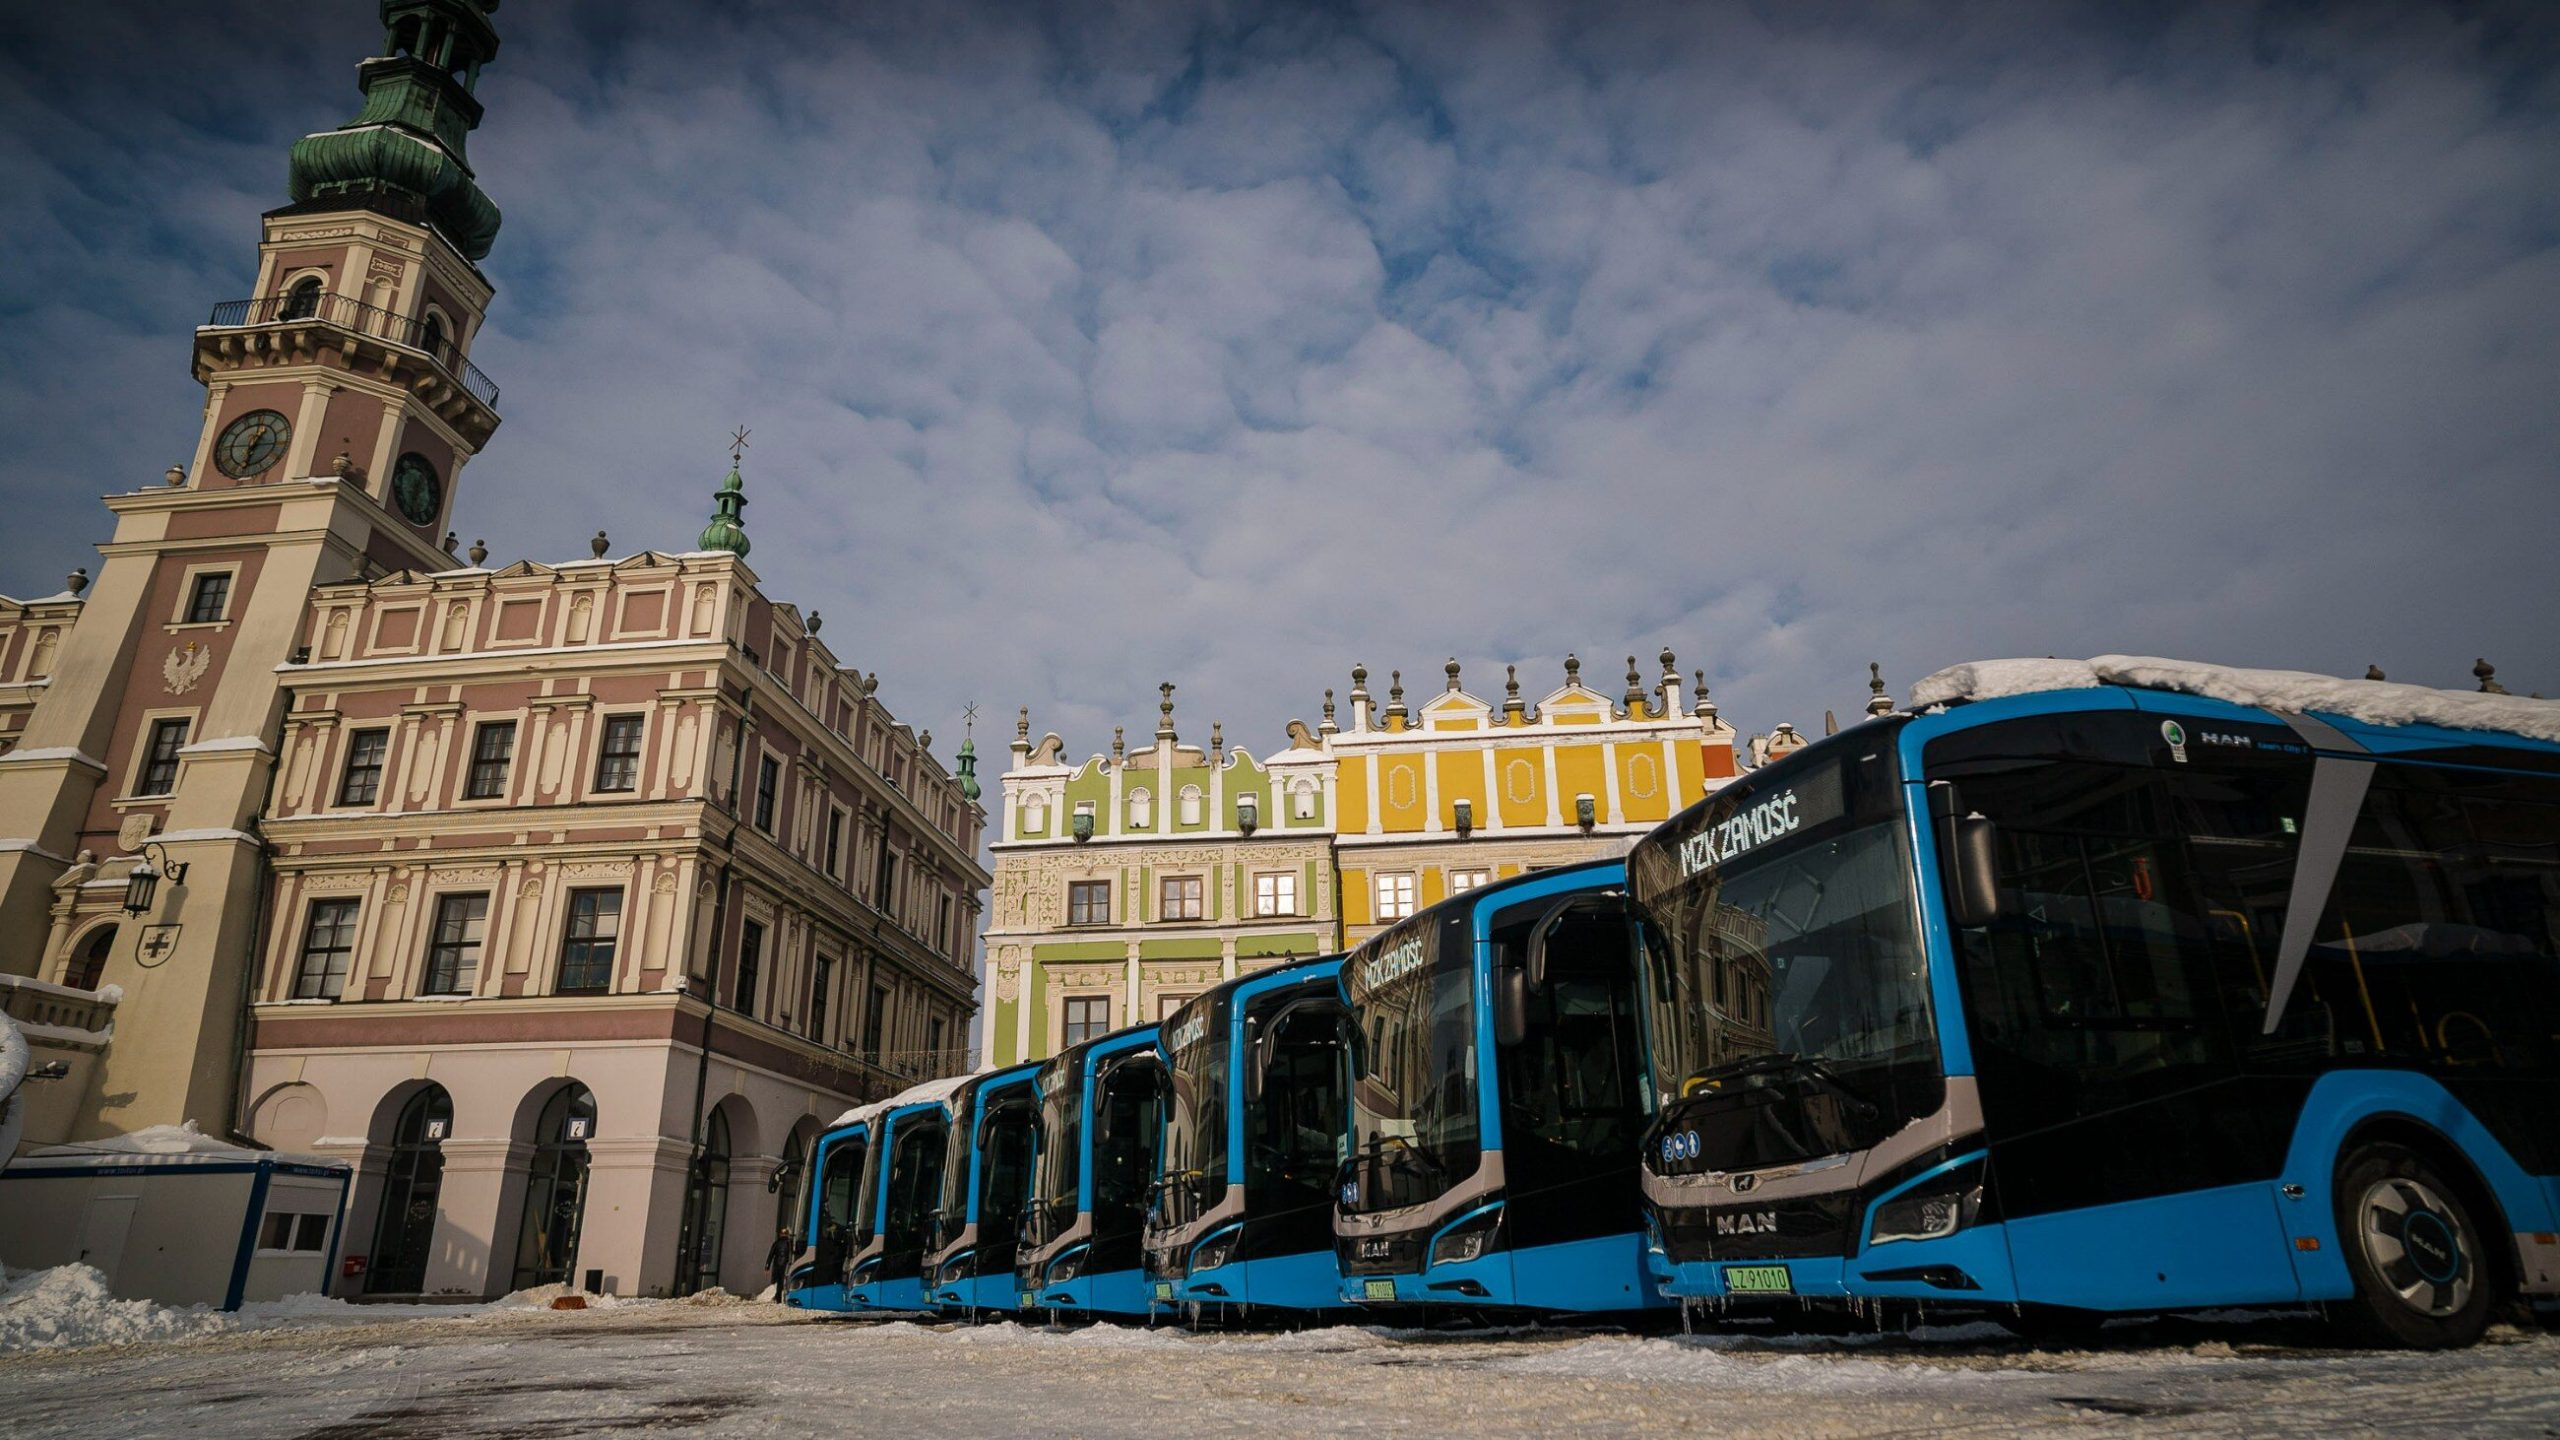 "Electric lions" on the streets of Zamość.  The city has just received 14 electric buses